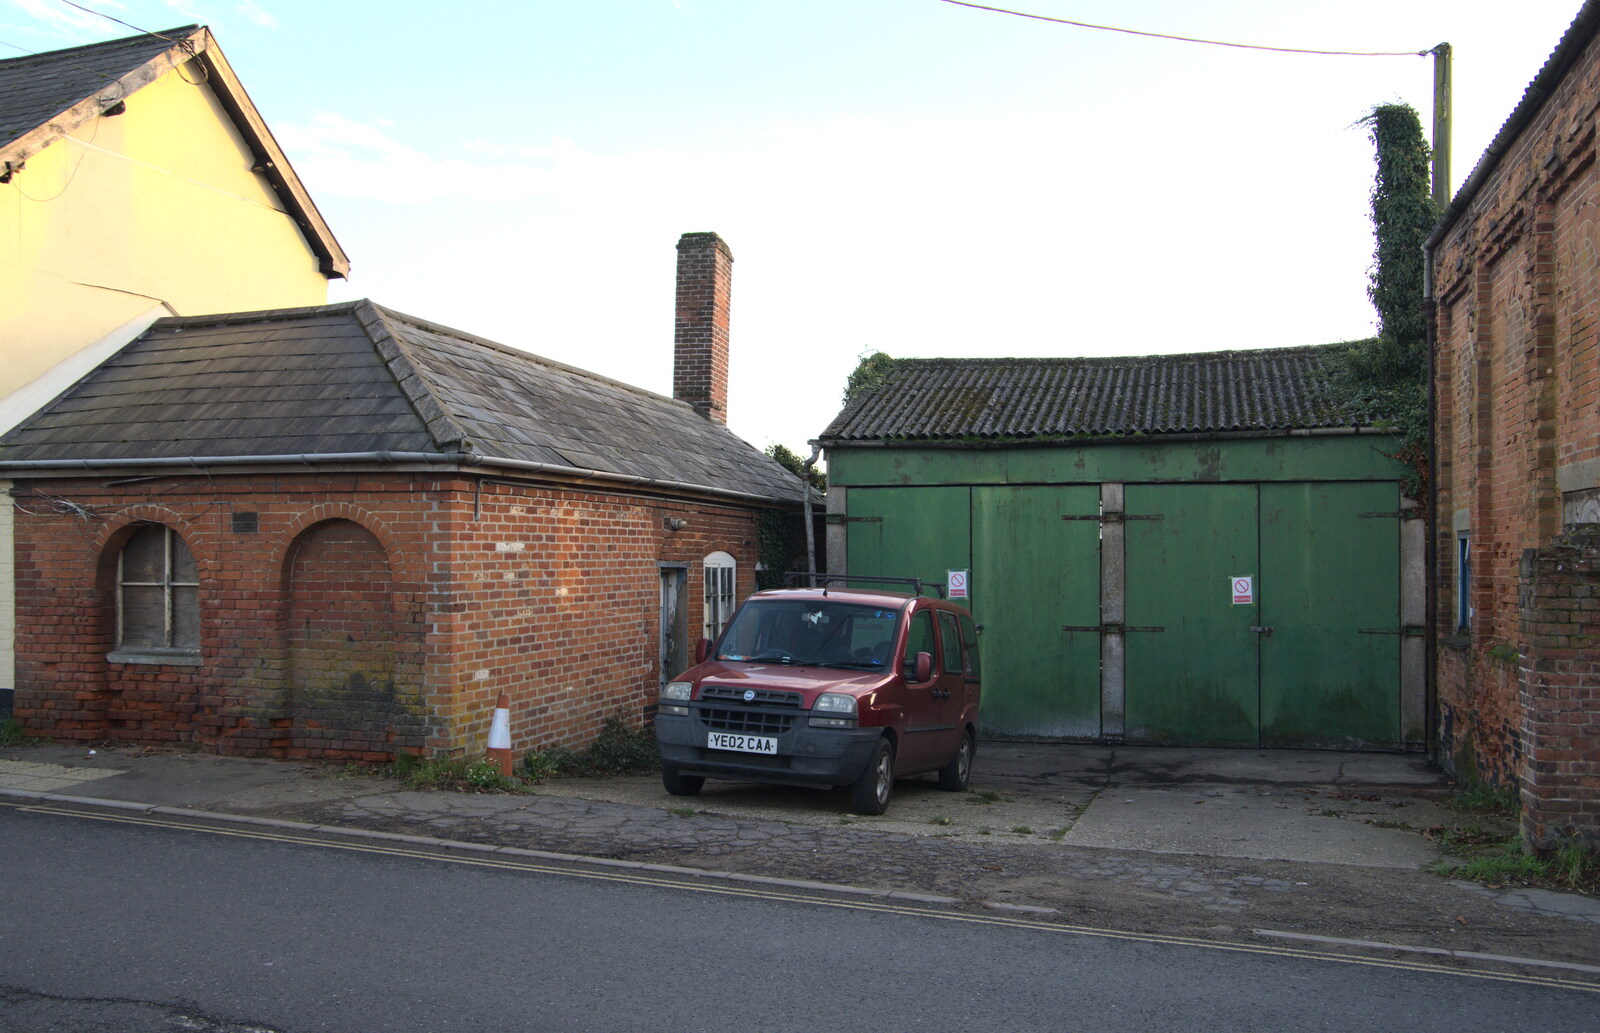 The old Eye fire station from The Dereliction of Eye, Suffolk - 22nd November 2020